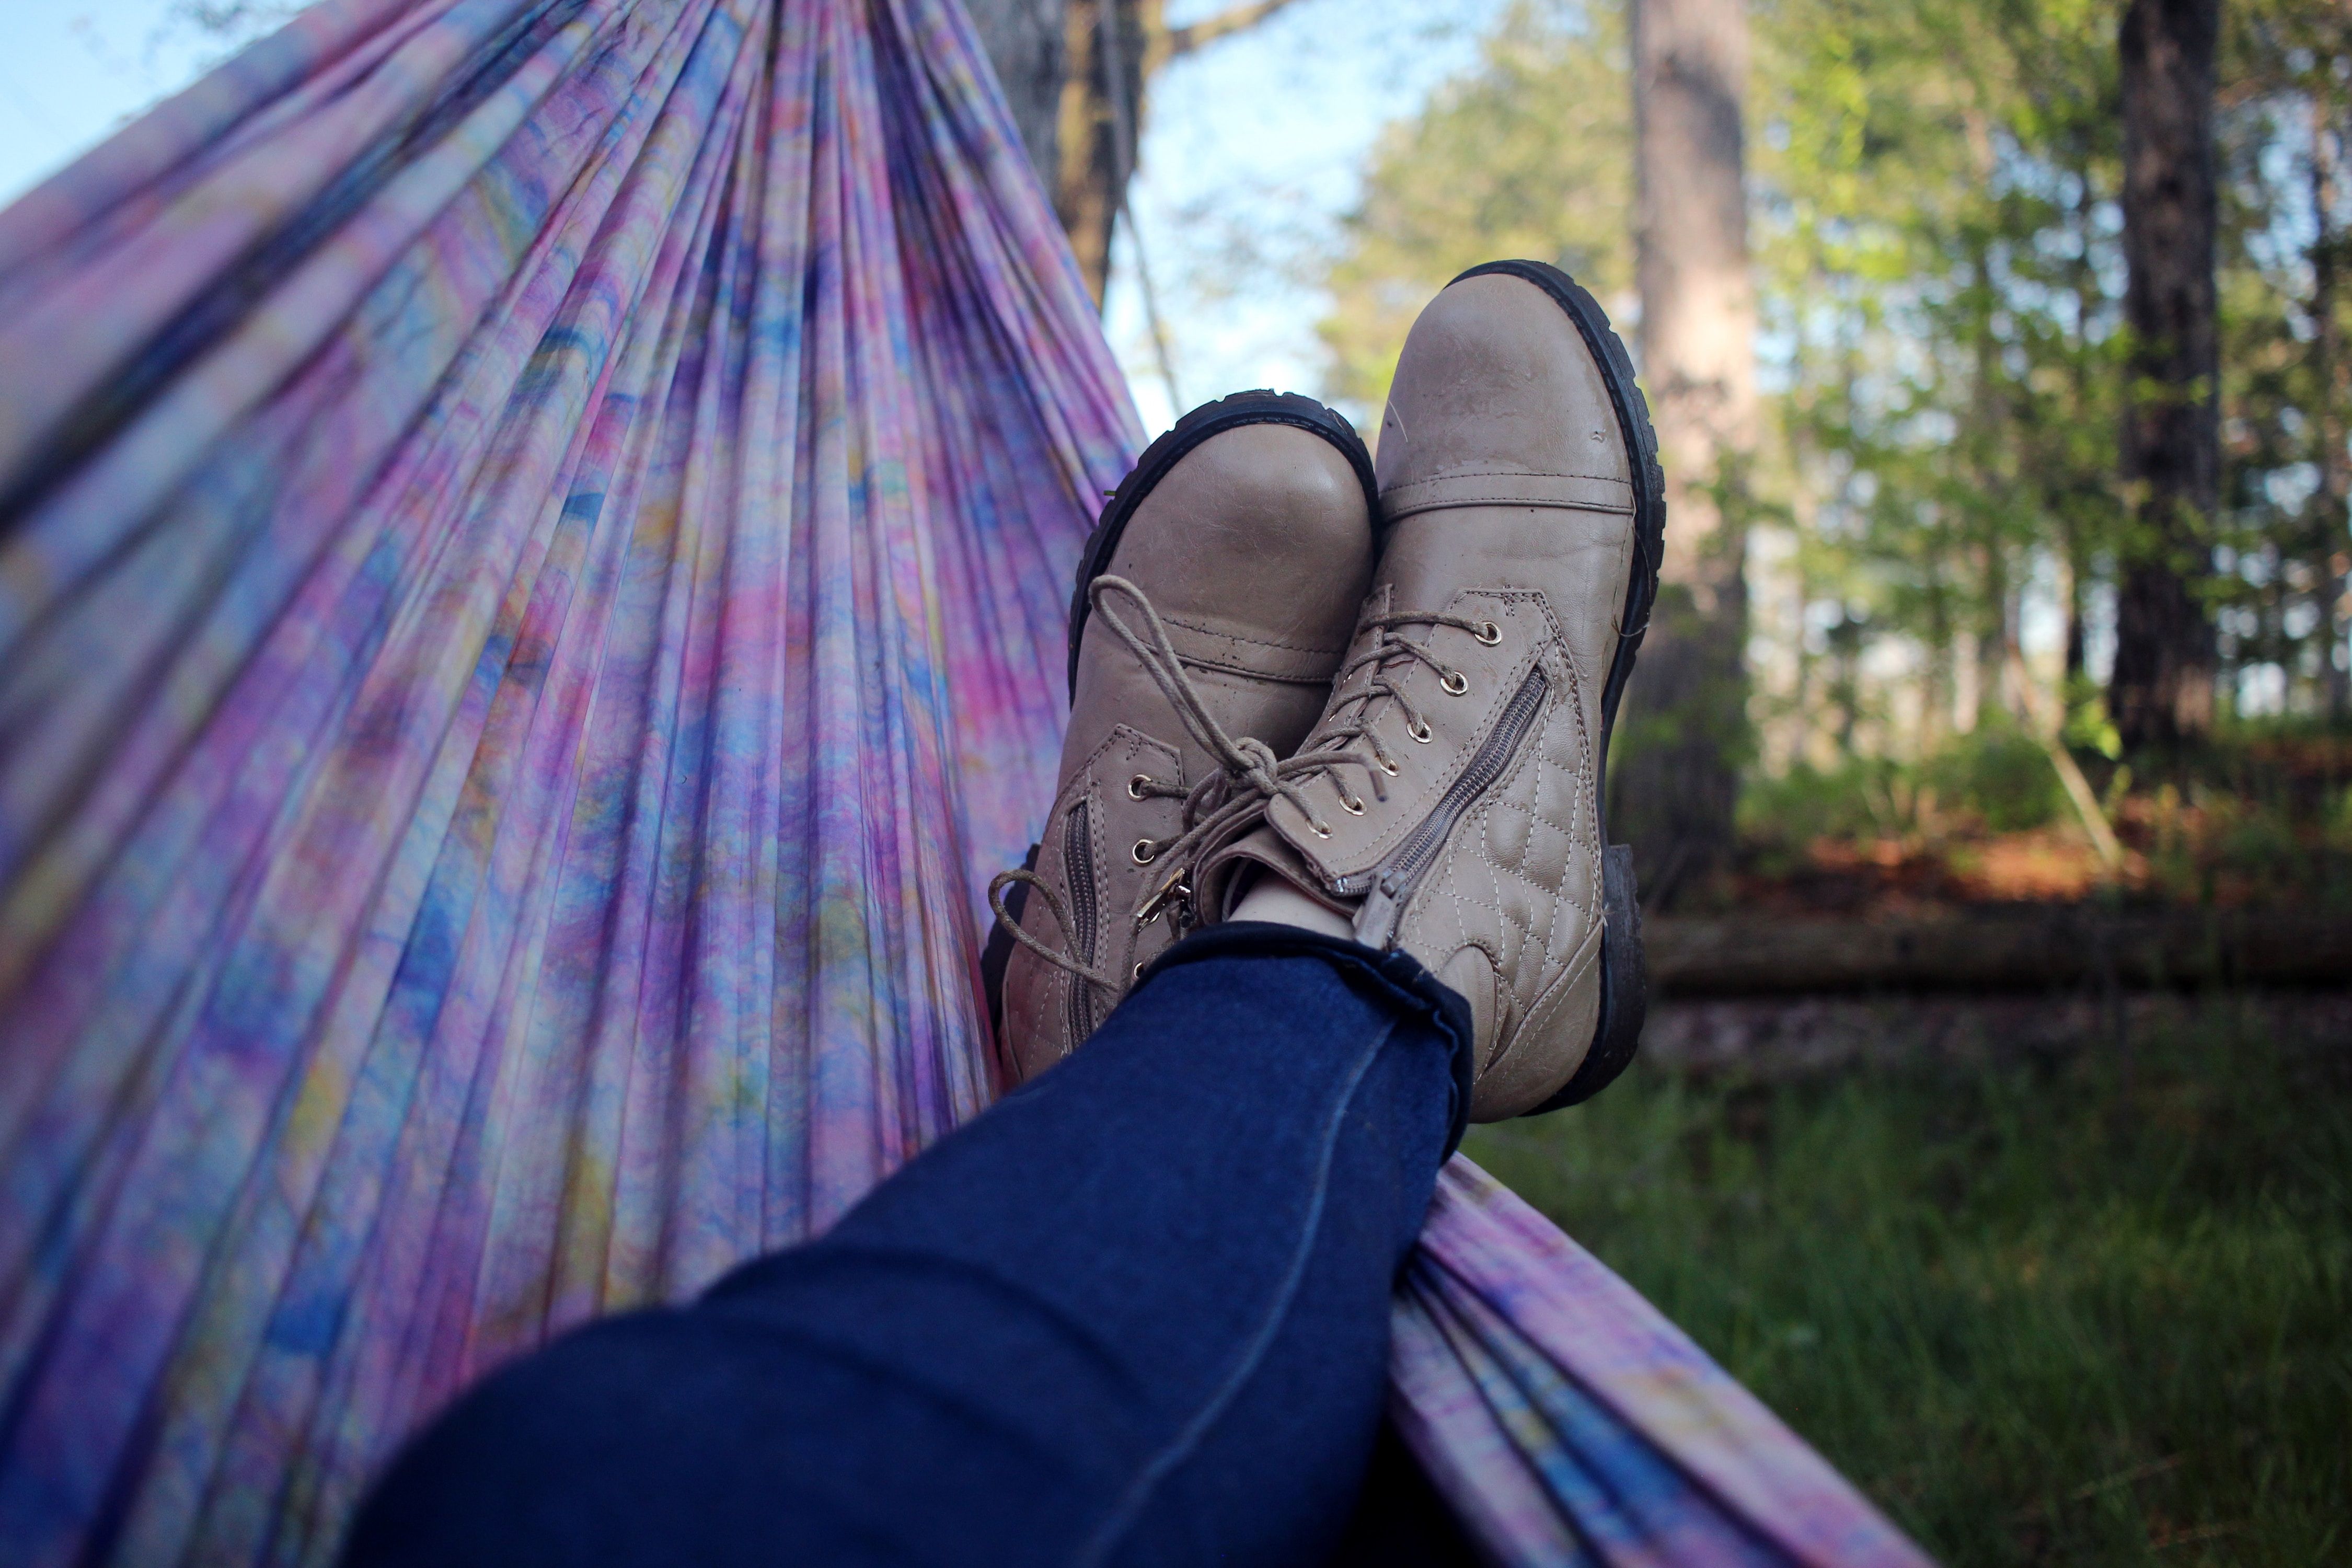 A person relaxing in a hammock outdoors. Only their legs and boots are visible.